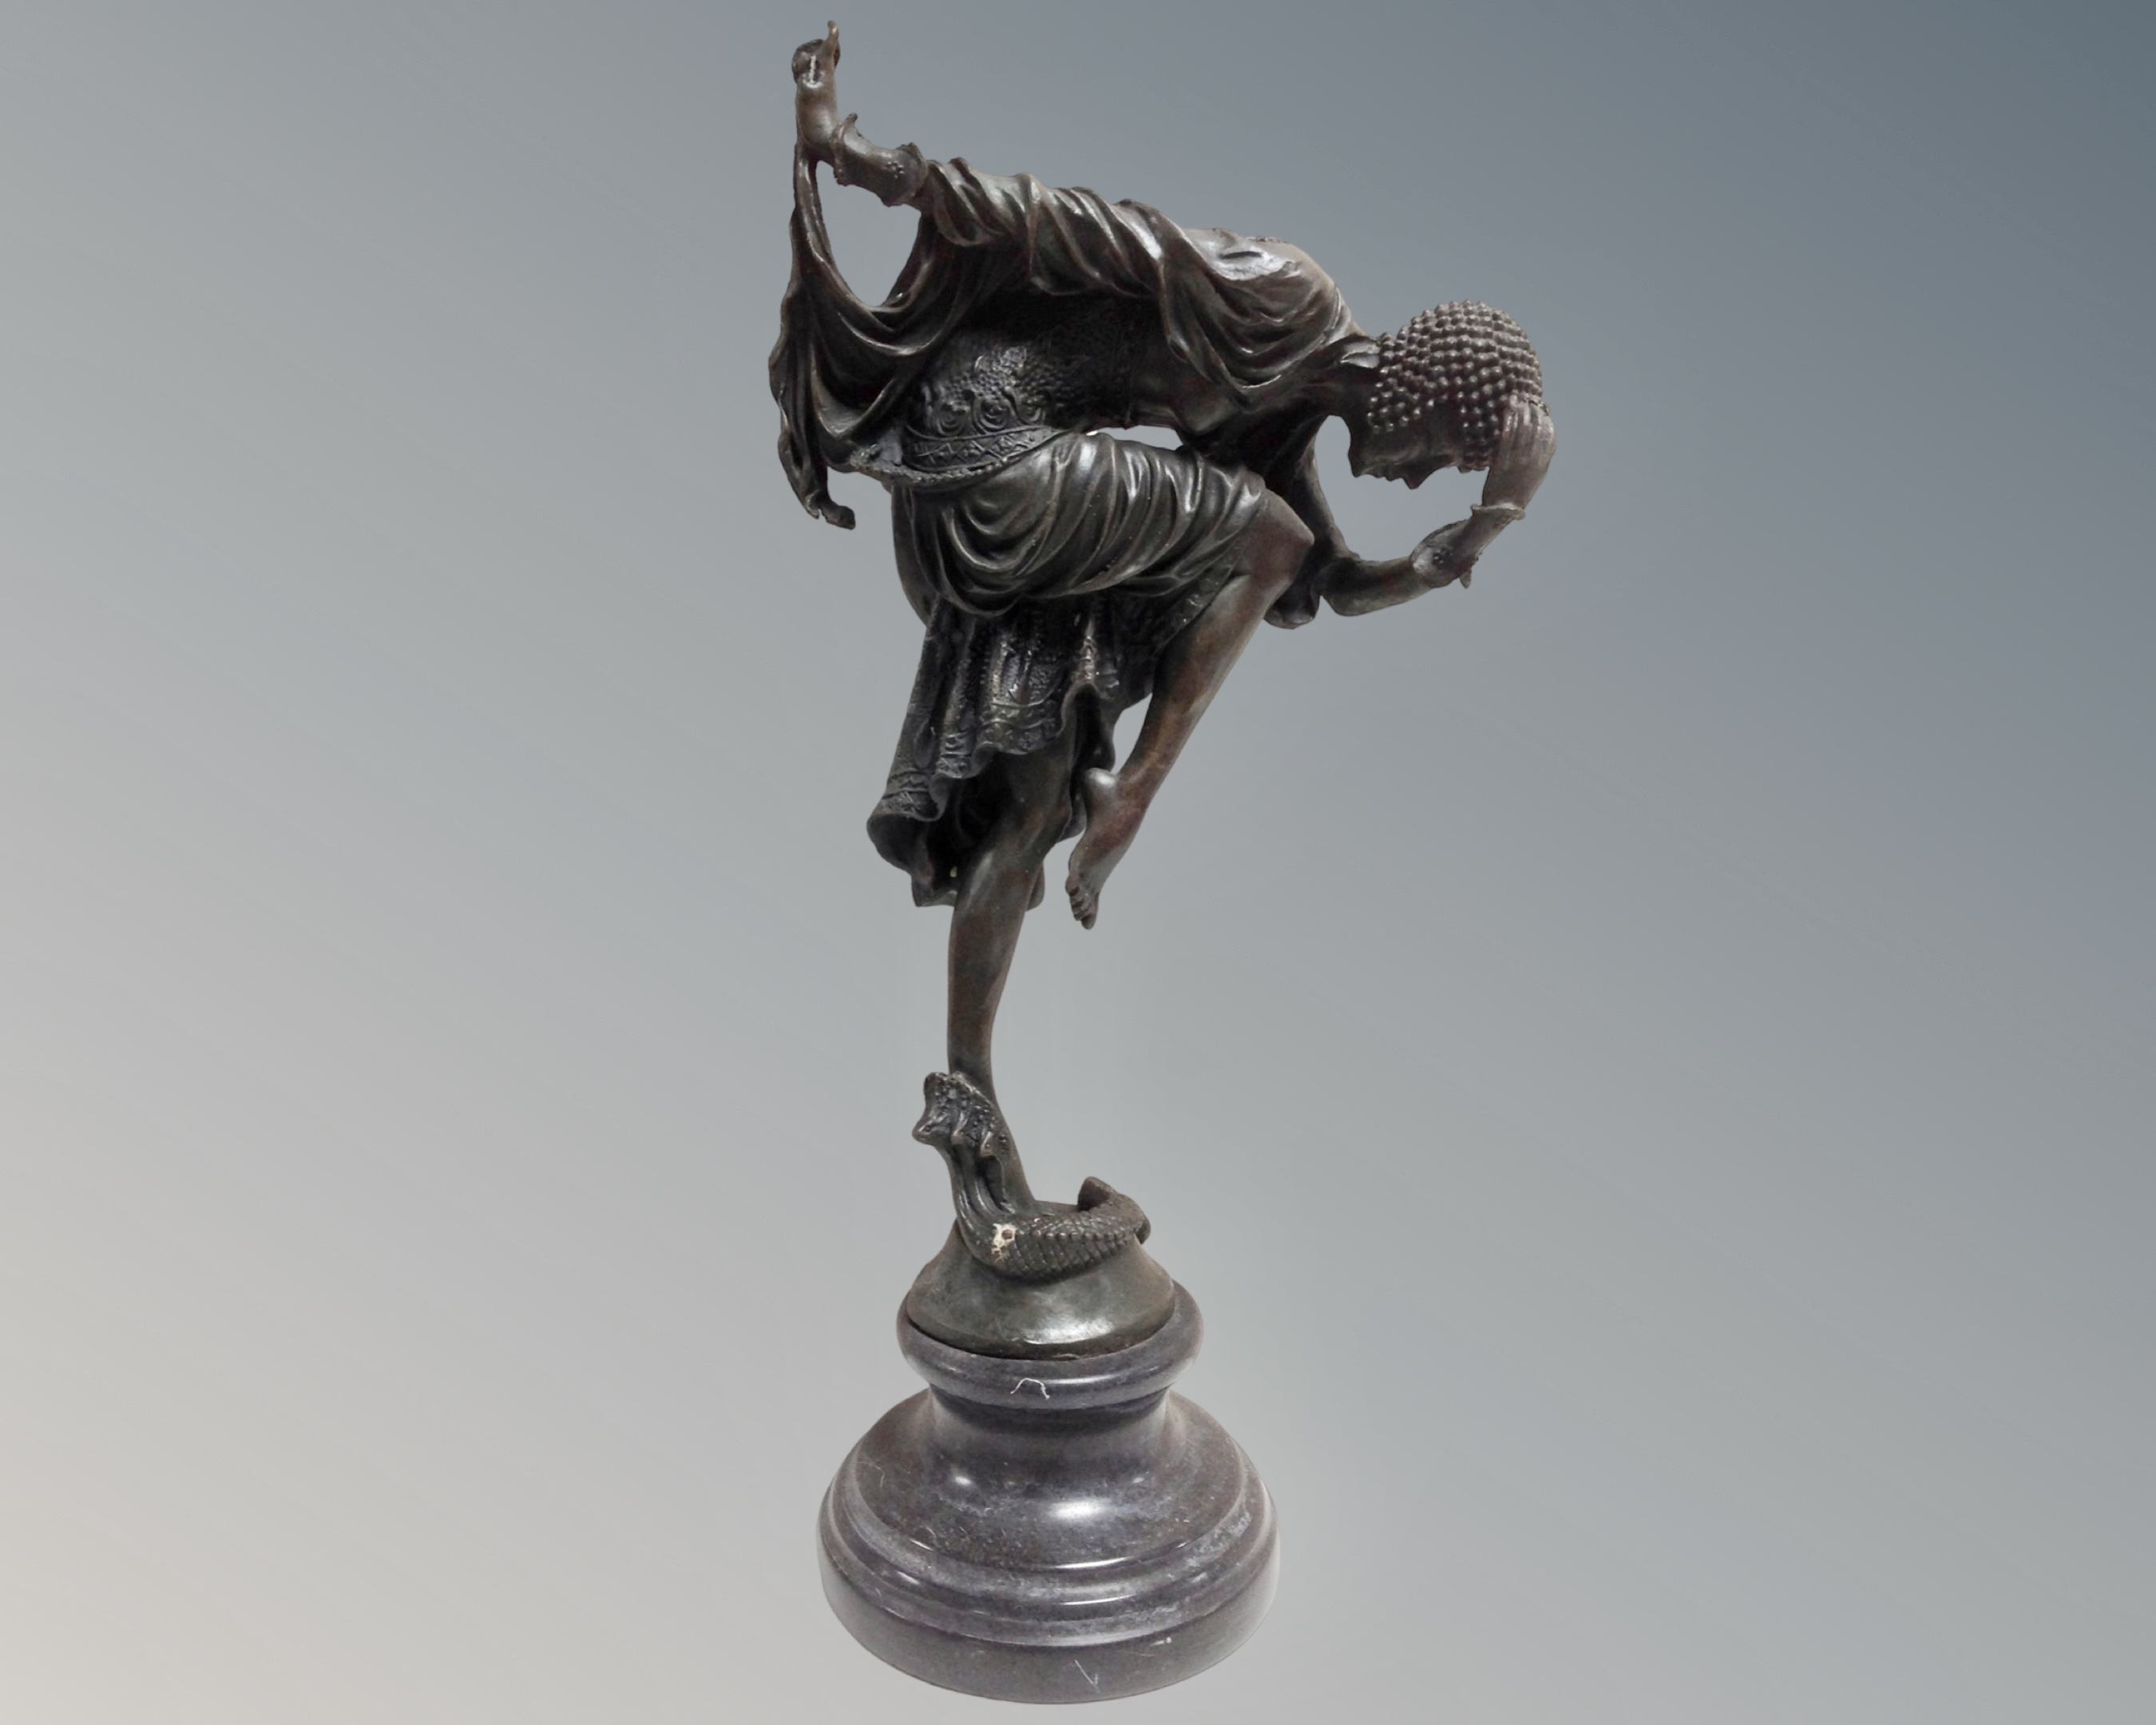 An Art Deco style cast bronze figure of a woman in flapper dress, with a serpent at her feet.